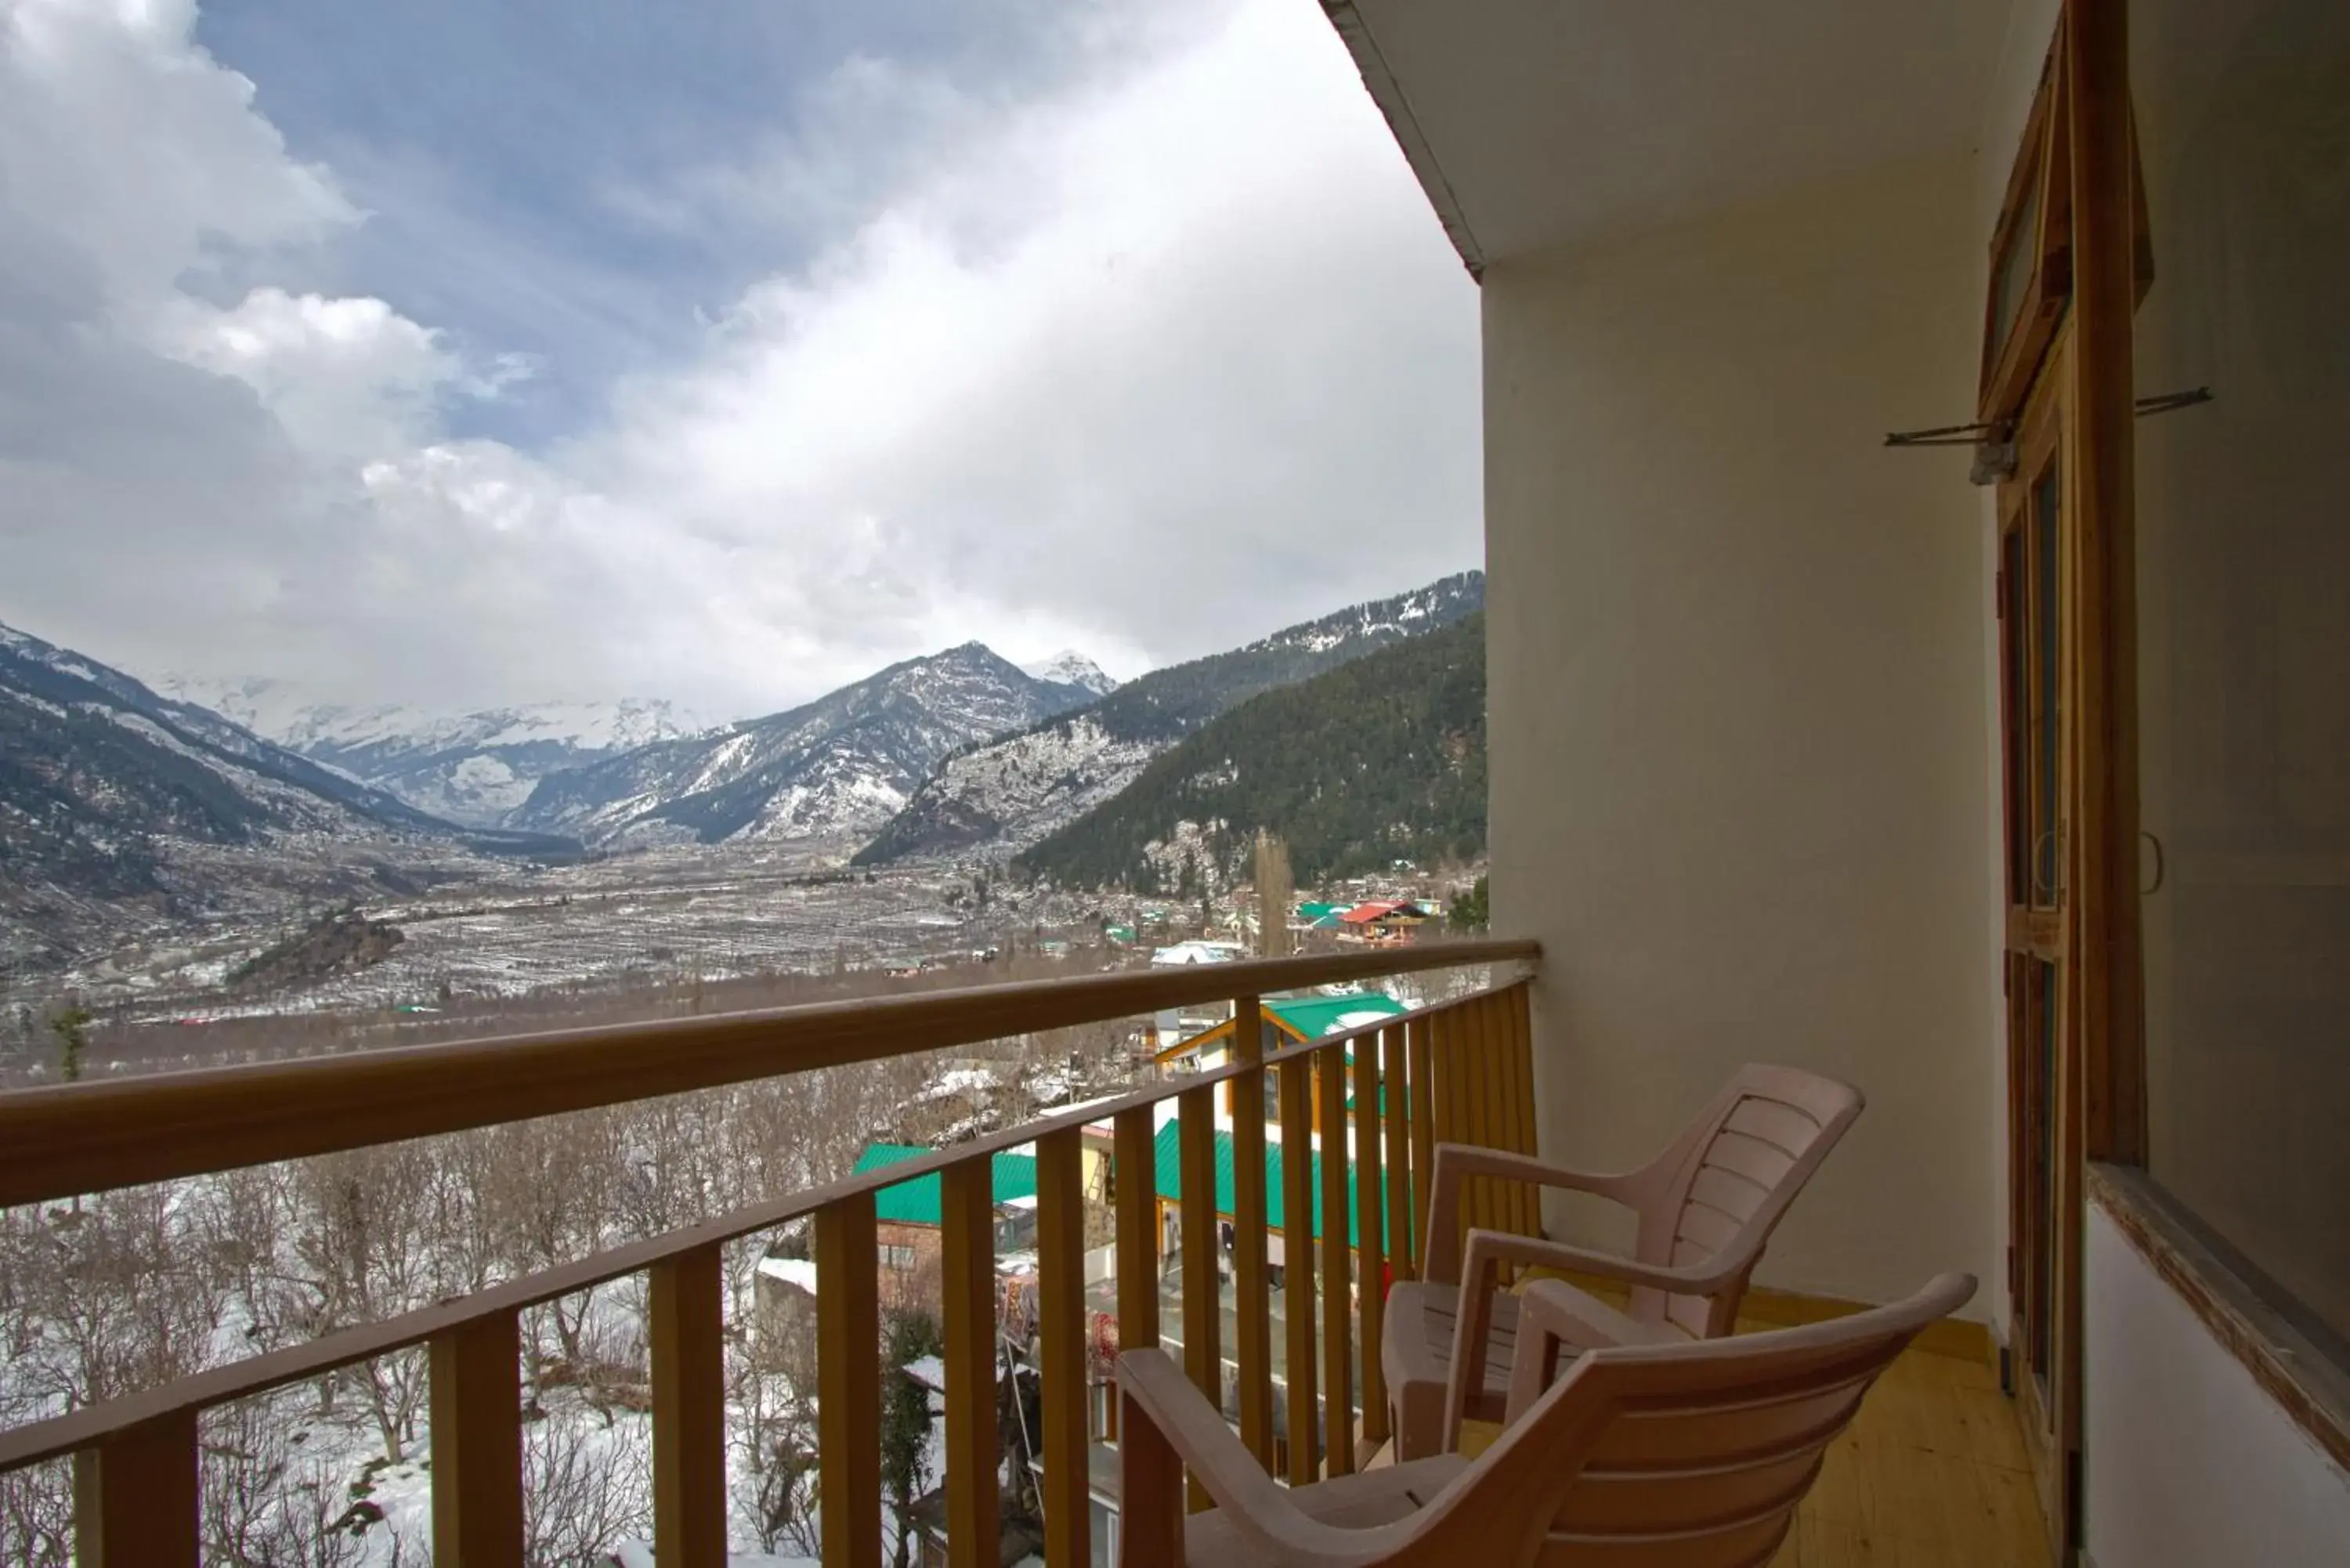 Balcony/Terrace in Sarthak Resorts-Reside in Nature with Best View, 9 kms from Mall Road Manali